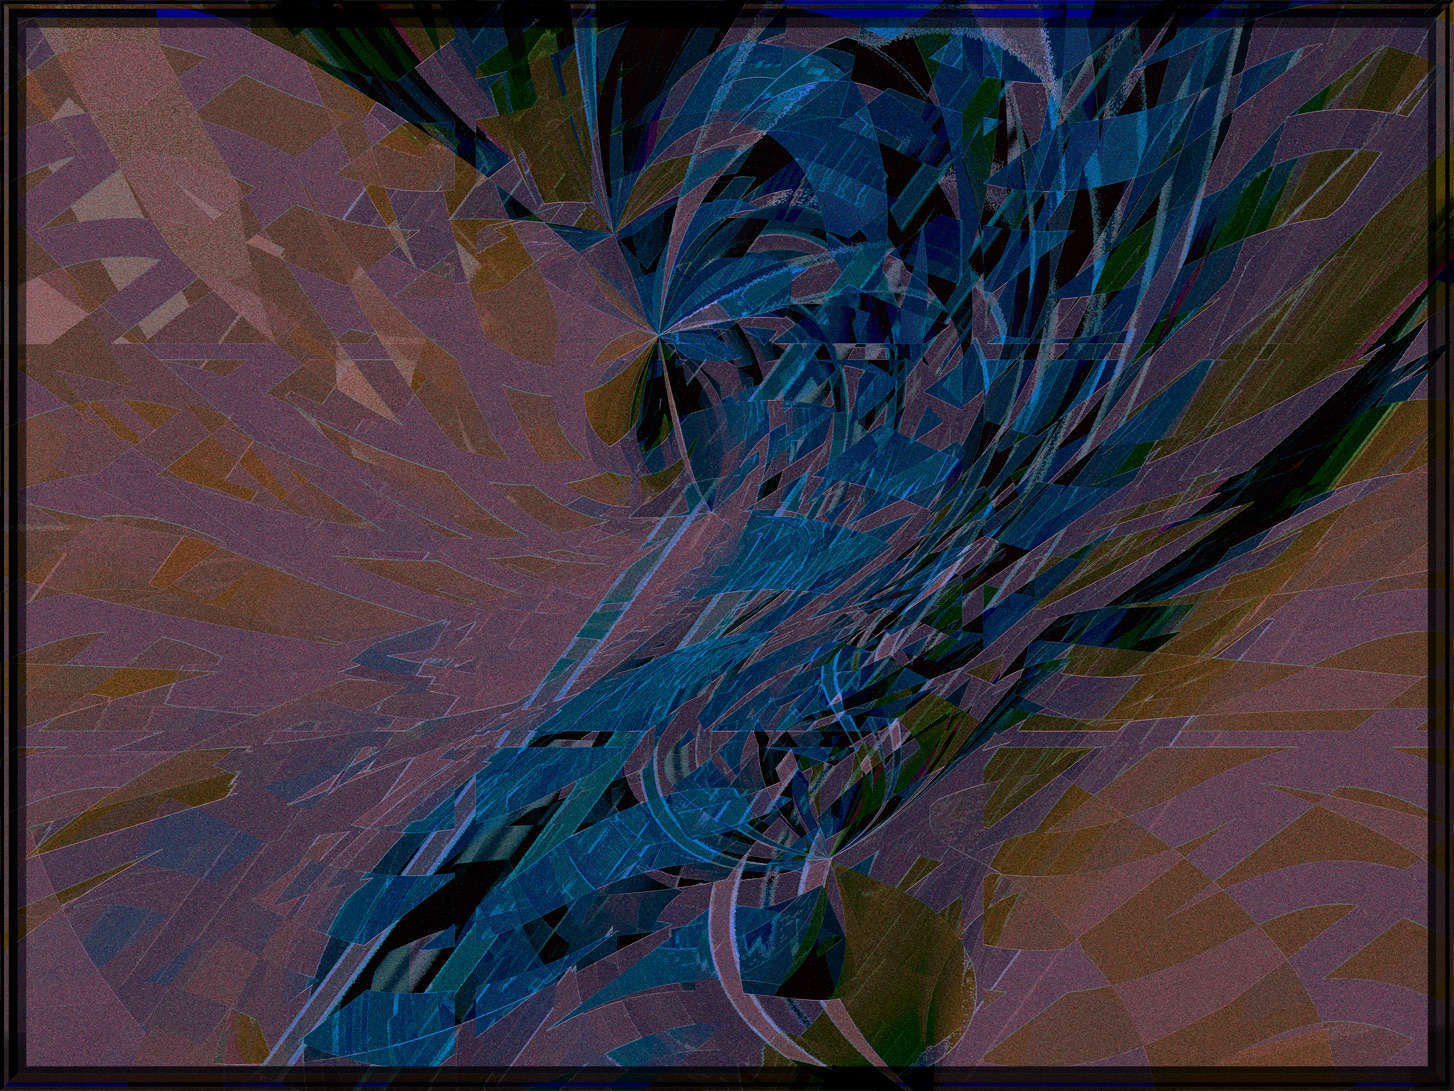 Blue_Jazz.jpg : Section 2 : American artist digital invention archival artifact color print image emerging capture creative convergent transparency universe dream history painter Hybrid exhibition